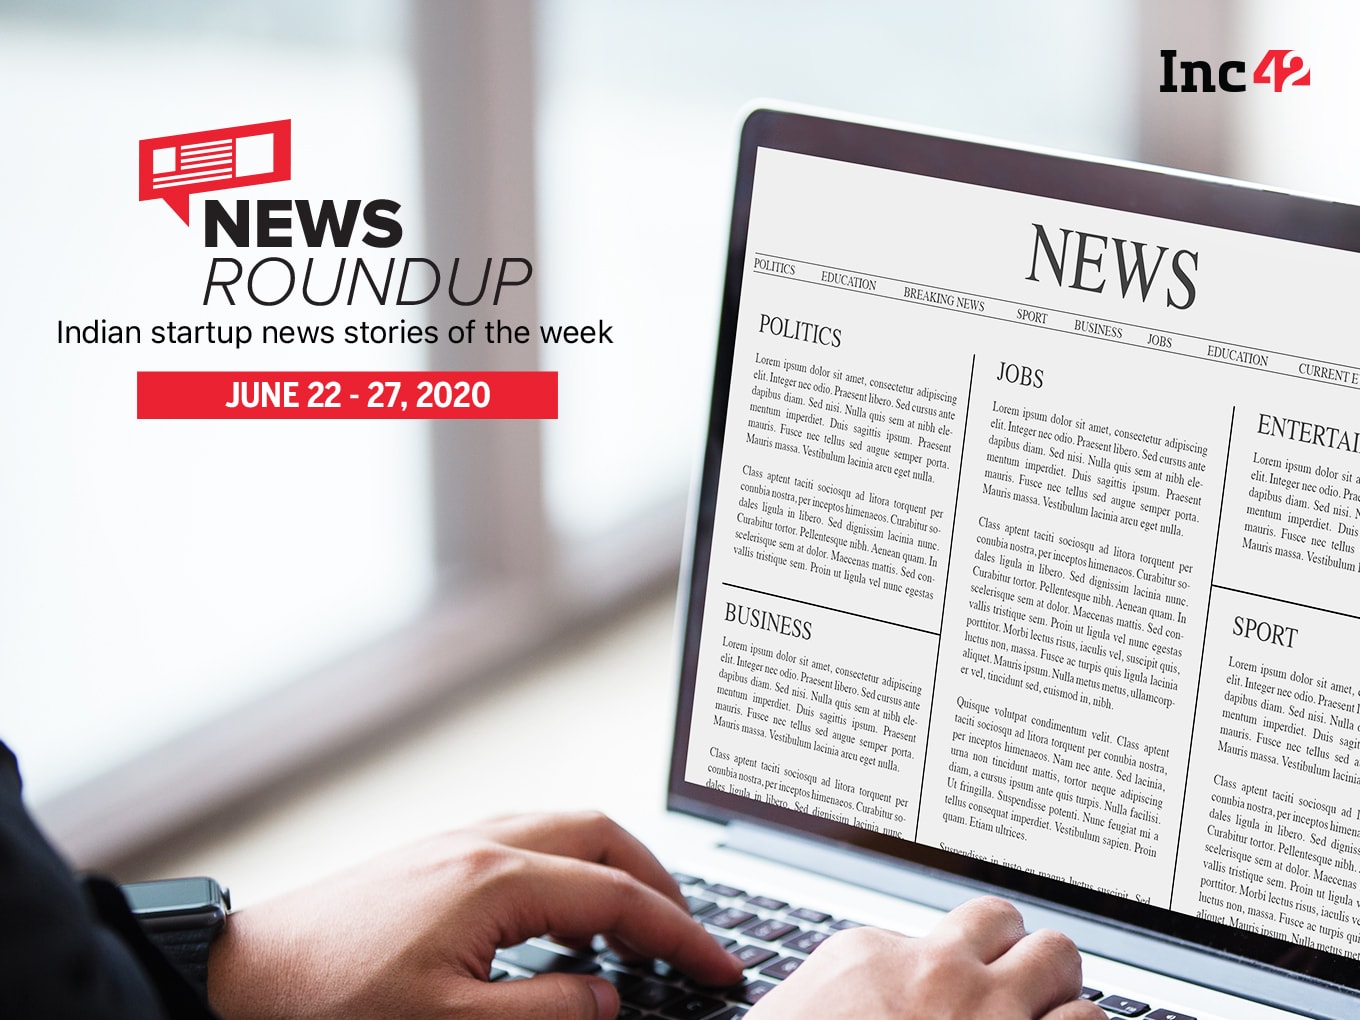 News Roundup: 11 Indian Startup News Stories You Don’t Want To Miss This Week [June 22 - June 27]